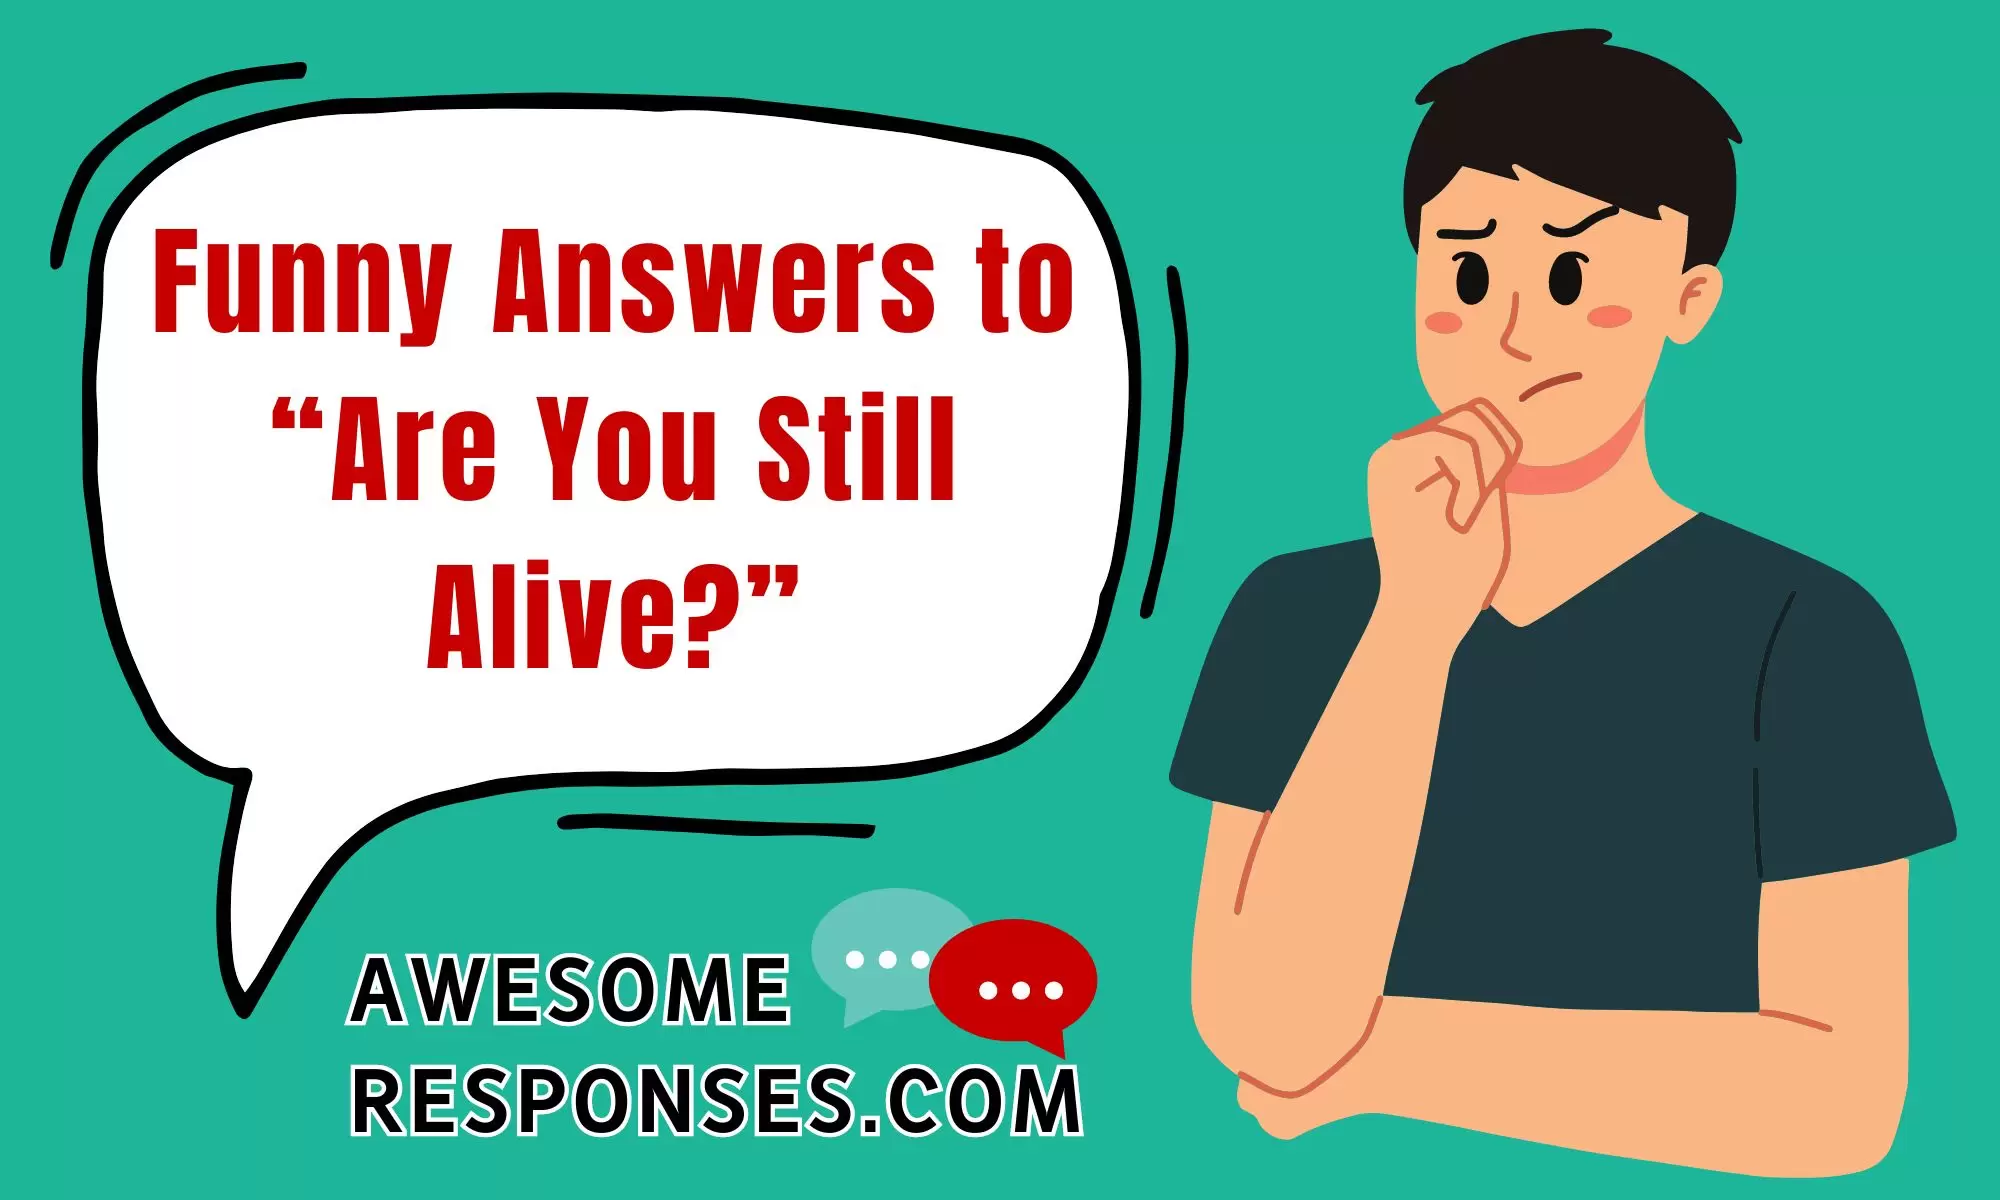 Funny Answers to “Are You Still Alive?”